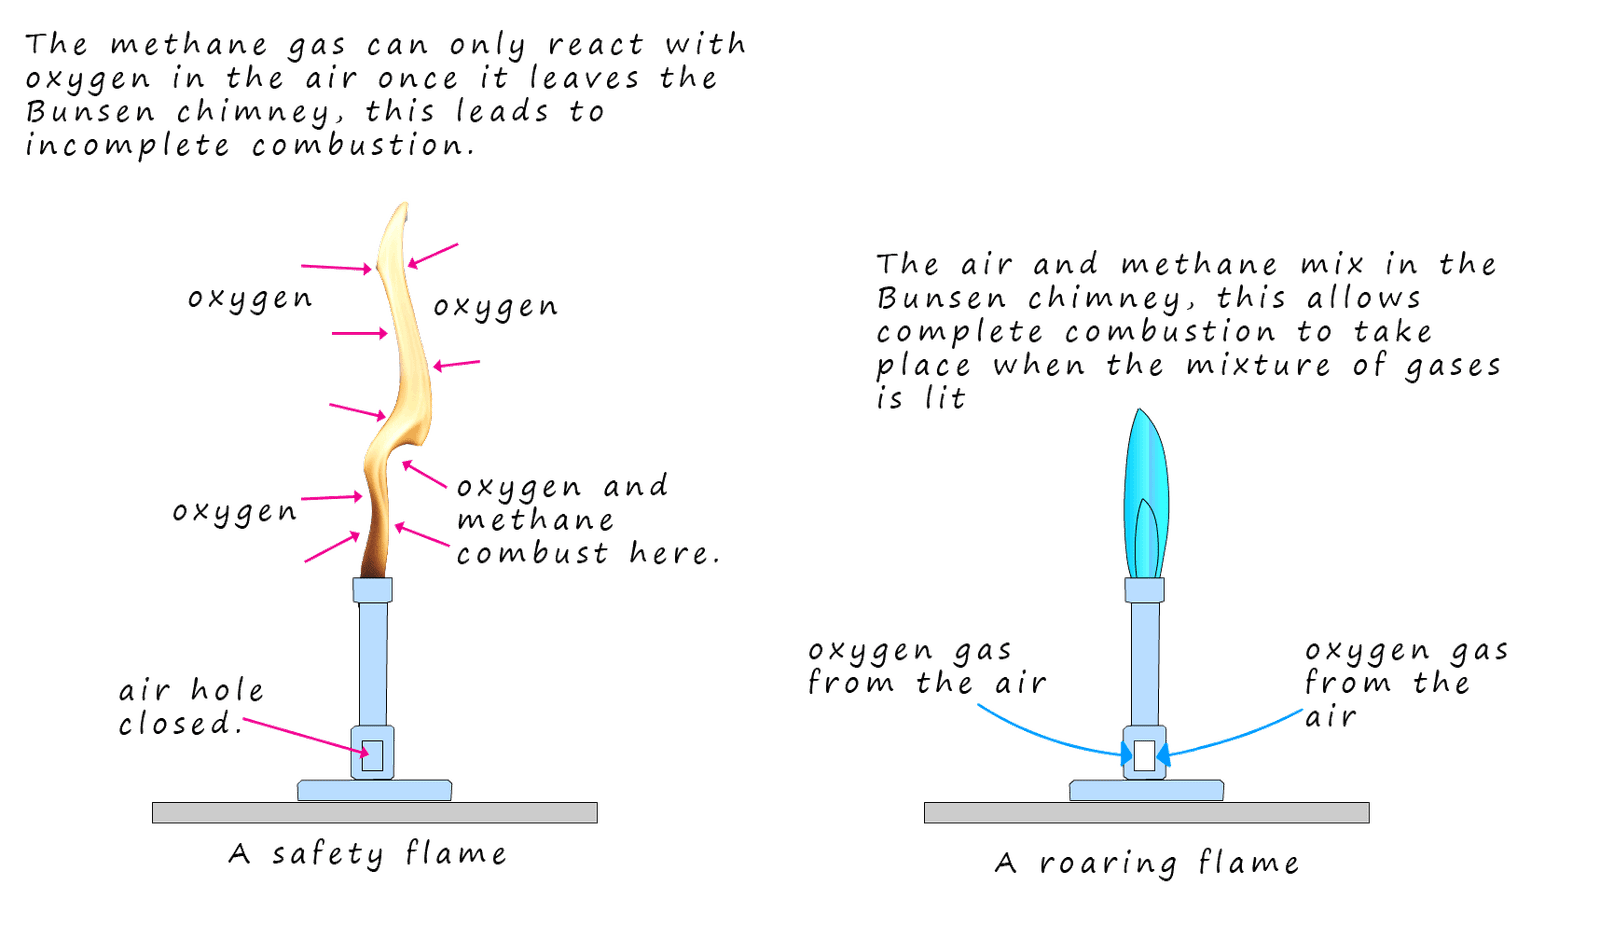 The differences between a Bunsen burner safety flame and a roaring flame, complete combustion in the roaring flame and incomplete combustion of methane gas in the safety flame.